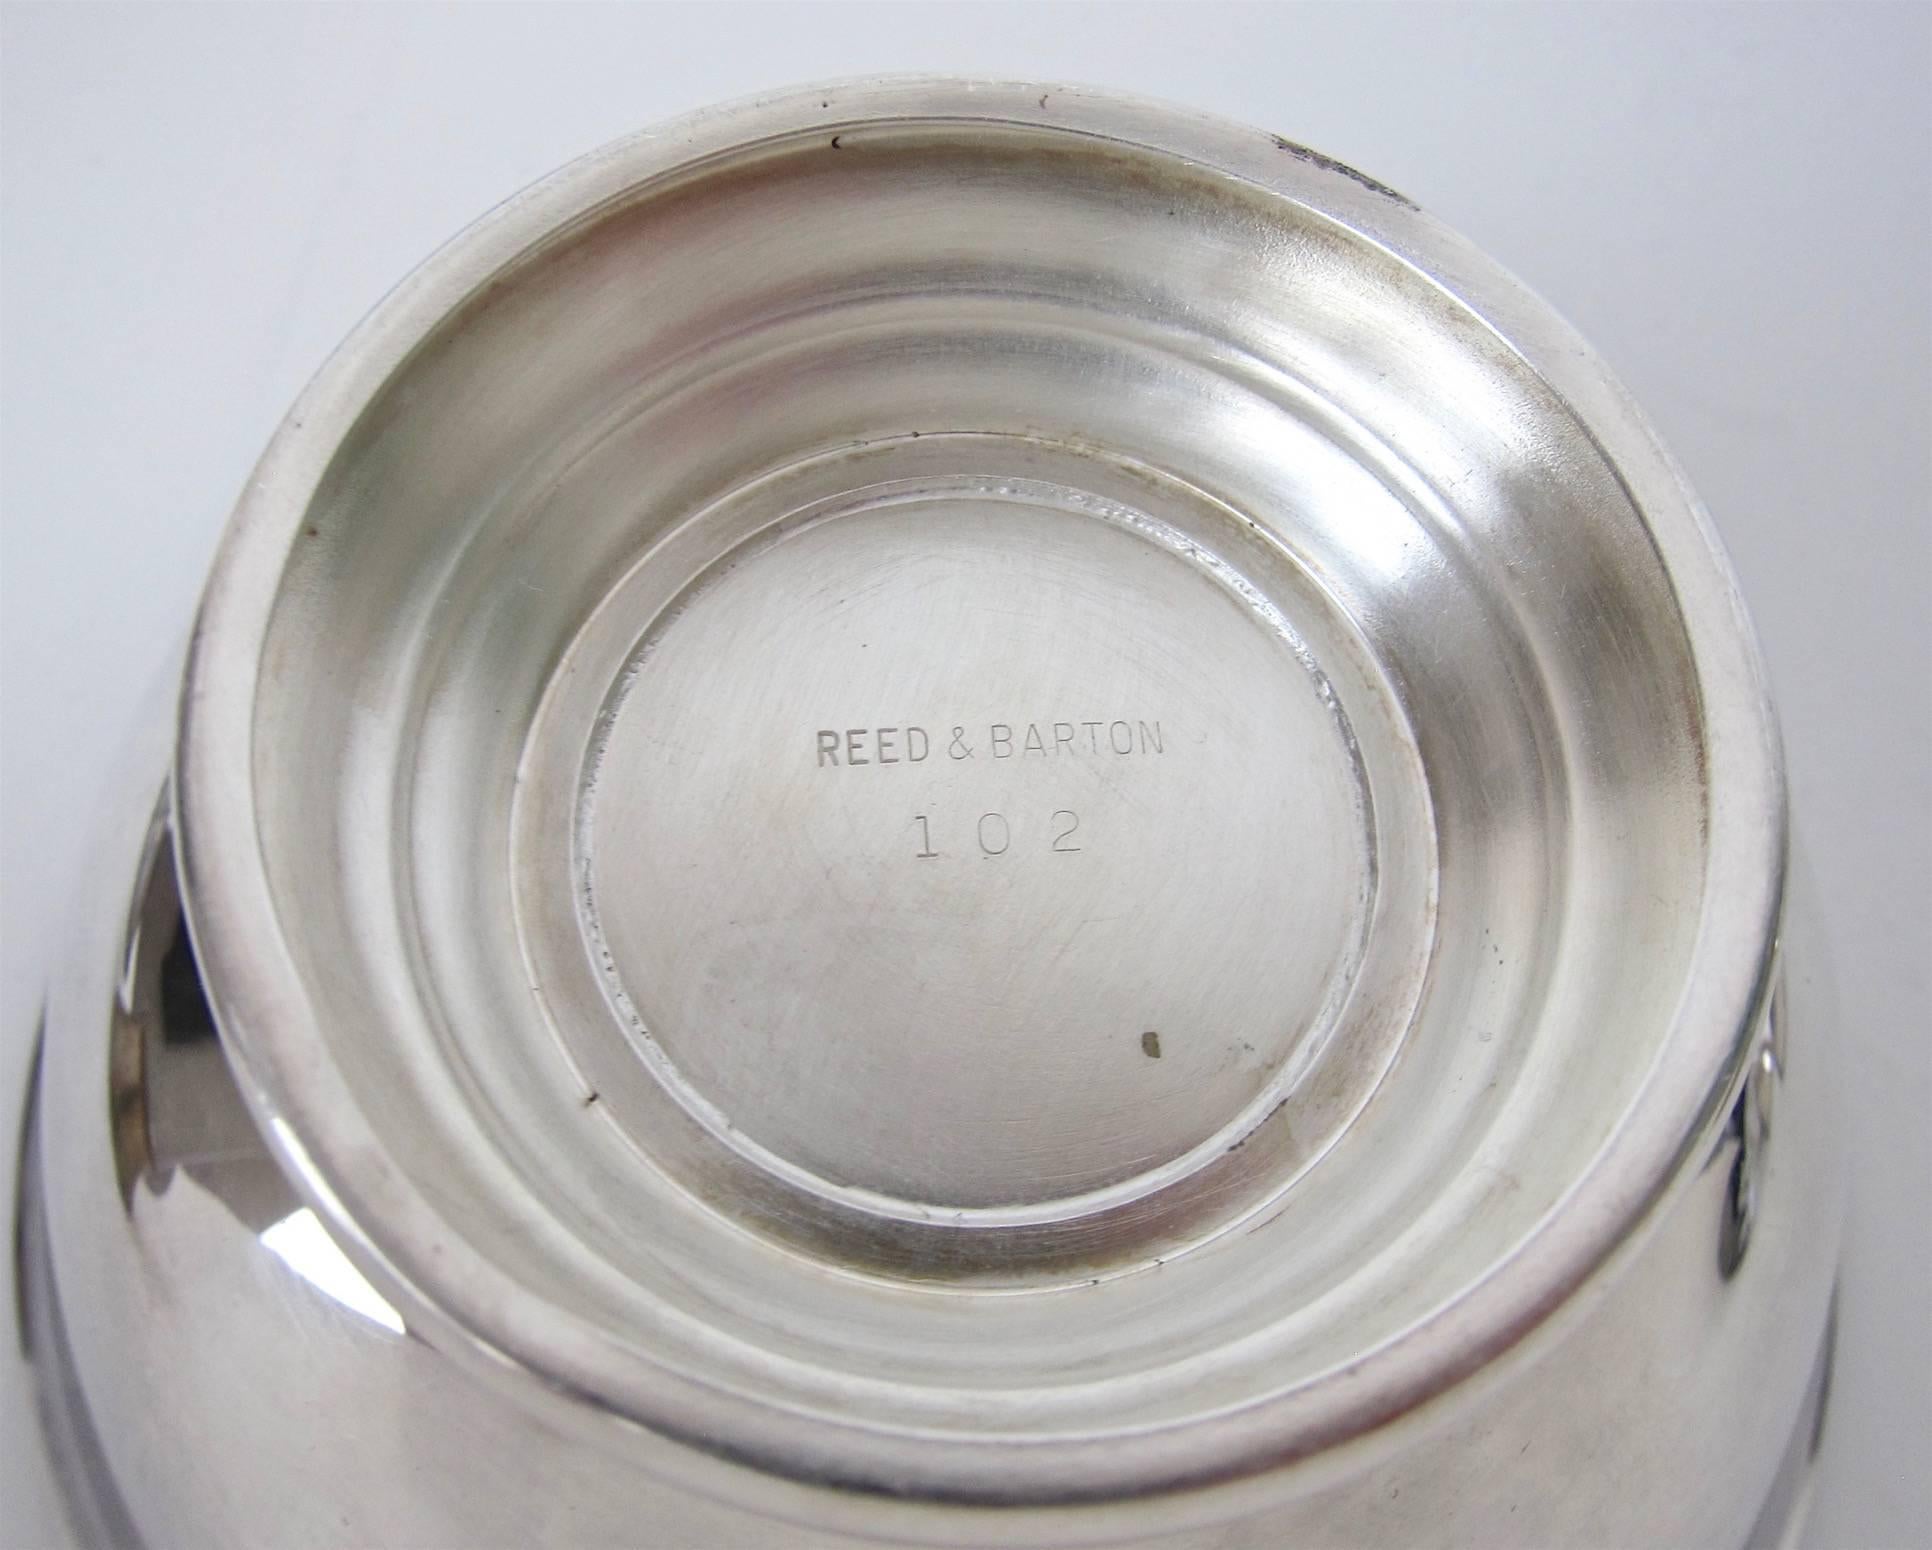 John Prip for Reed & Barton Mid-Century Silver Plate Collection in Blue 1